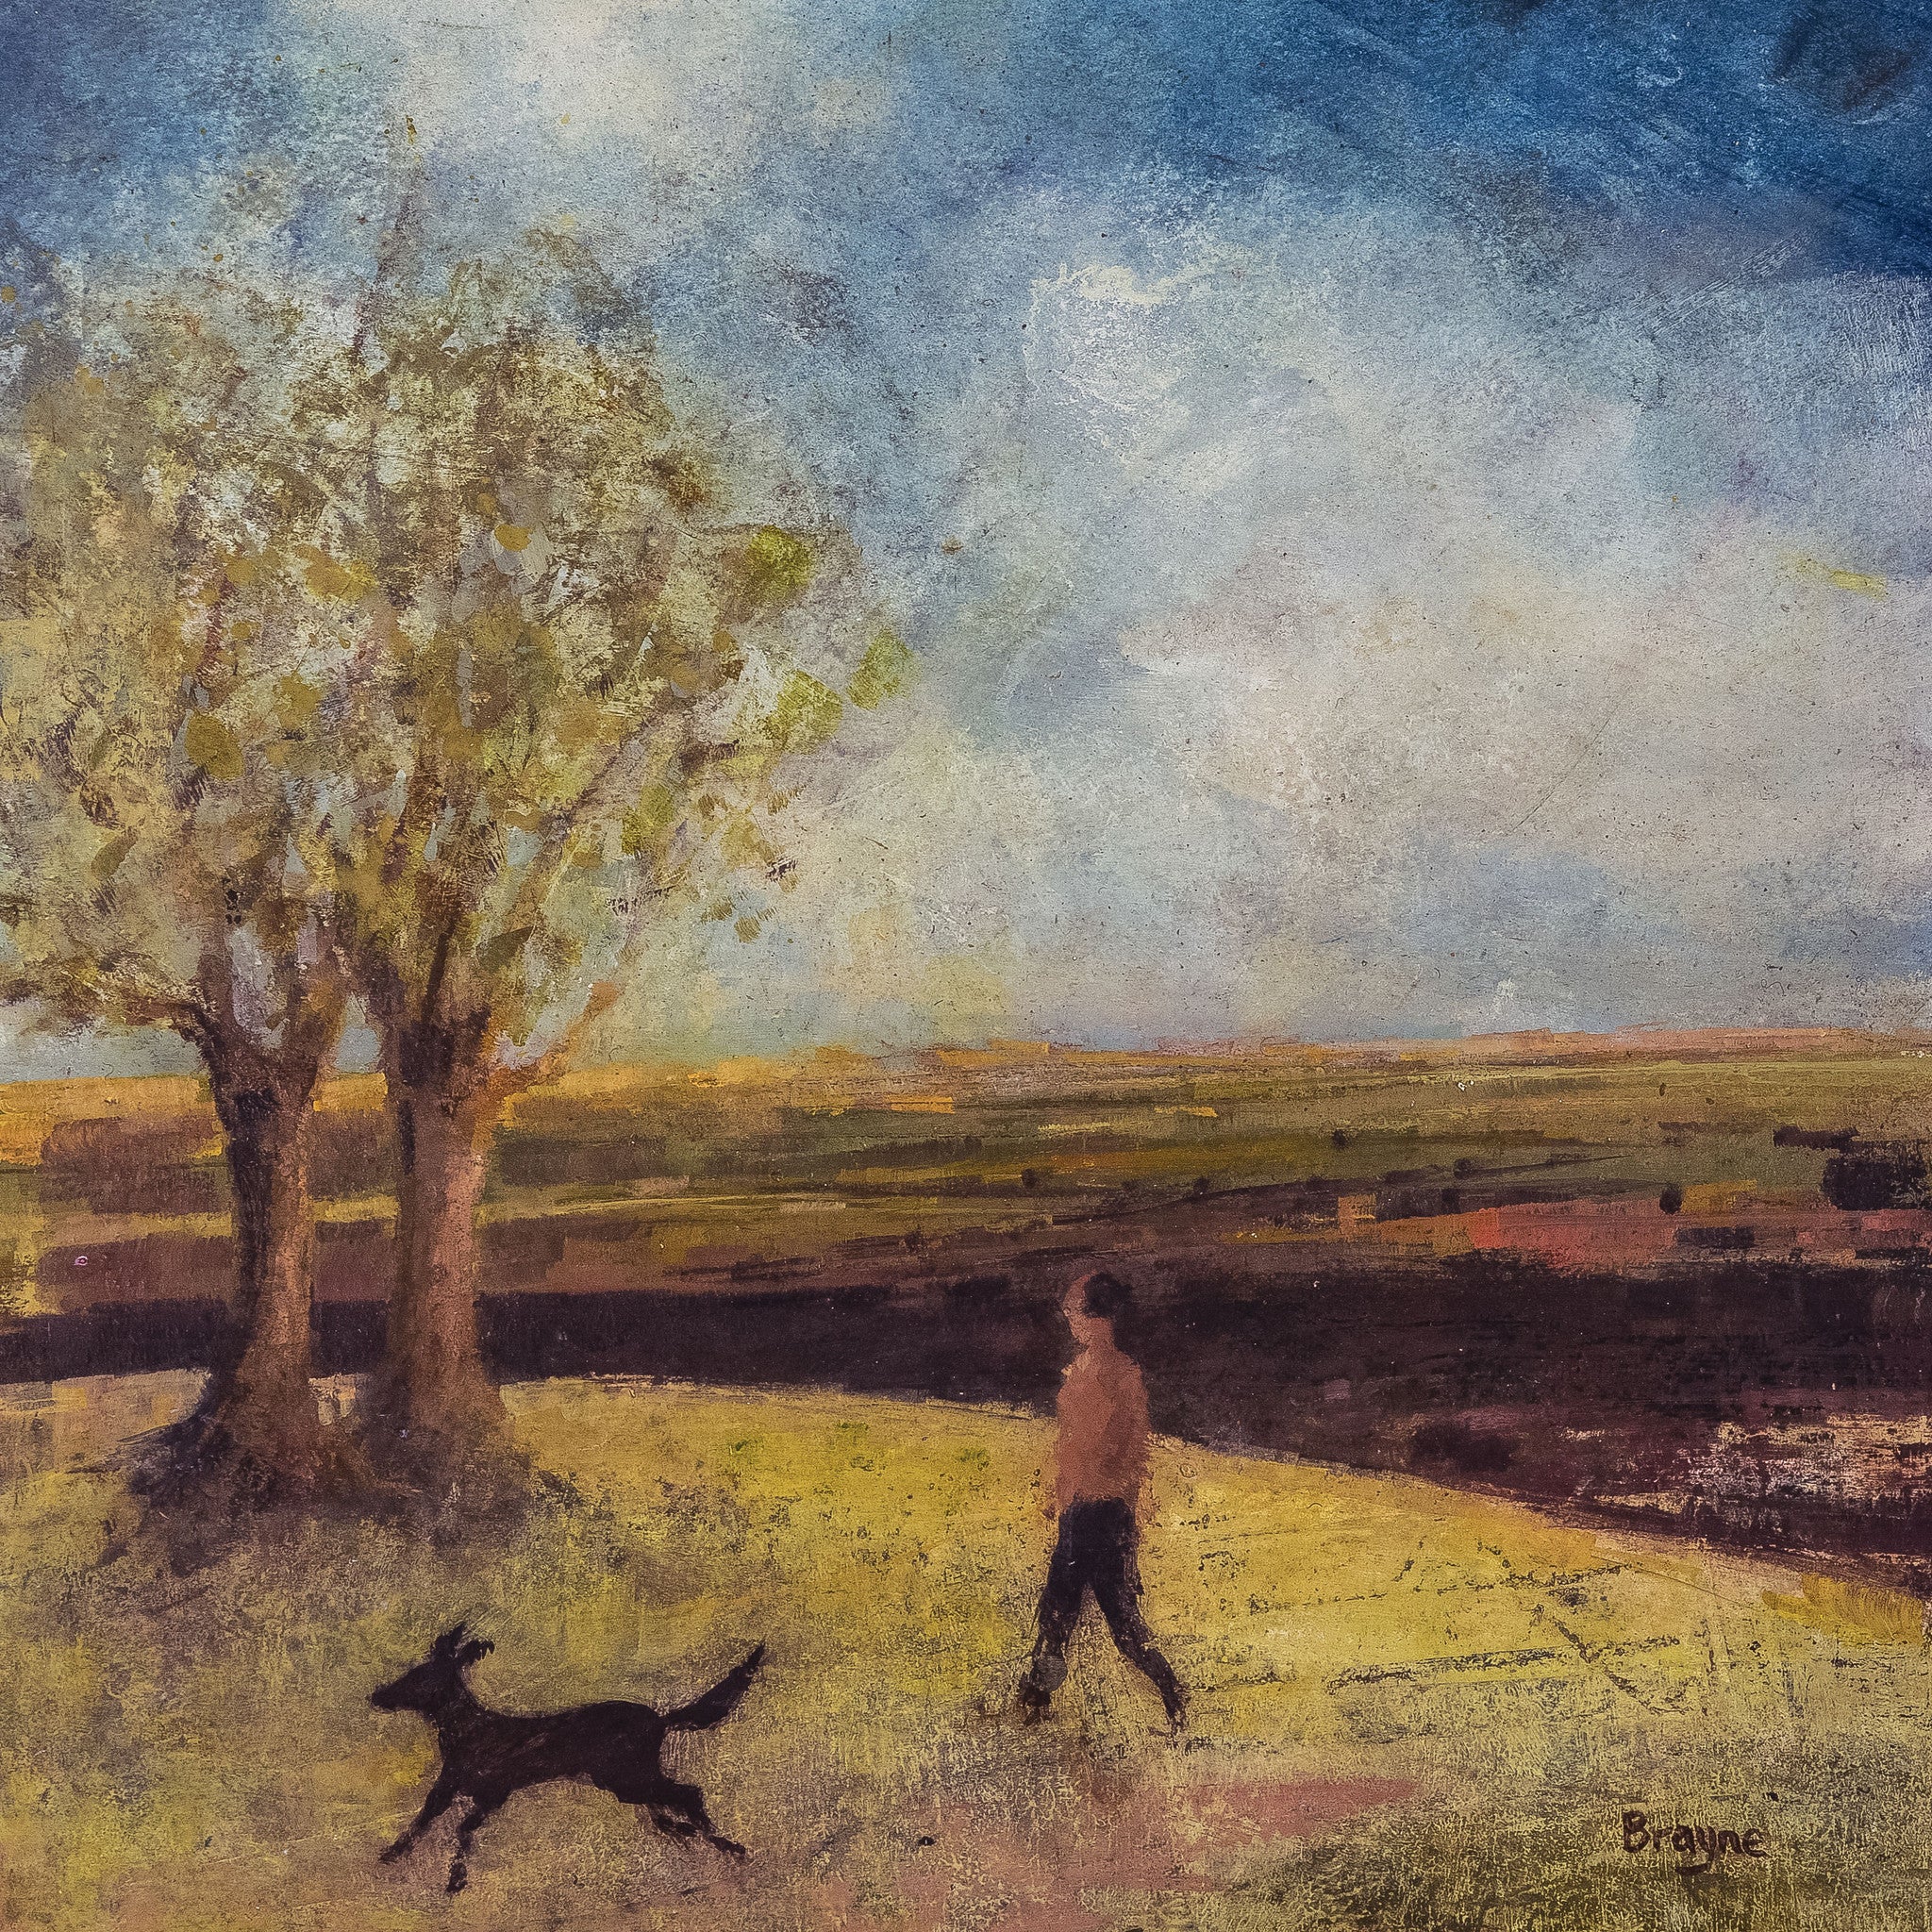 Edge of the Wood by David Brayne, Fine Art Greeting Card, Pigment and Acrylic on Canvas, Landscape with man and dog